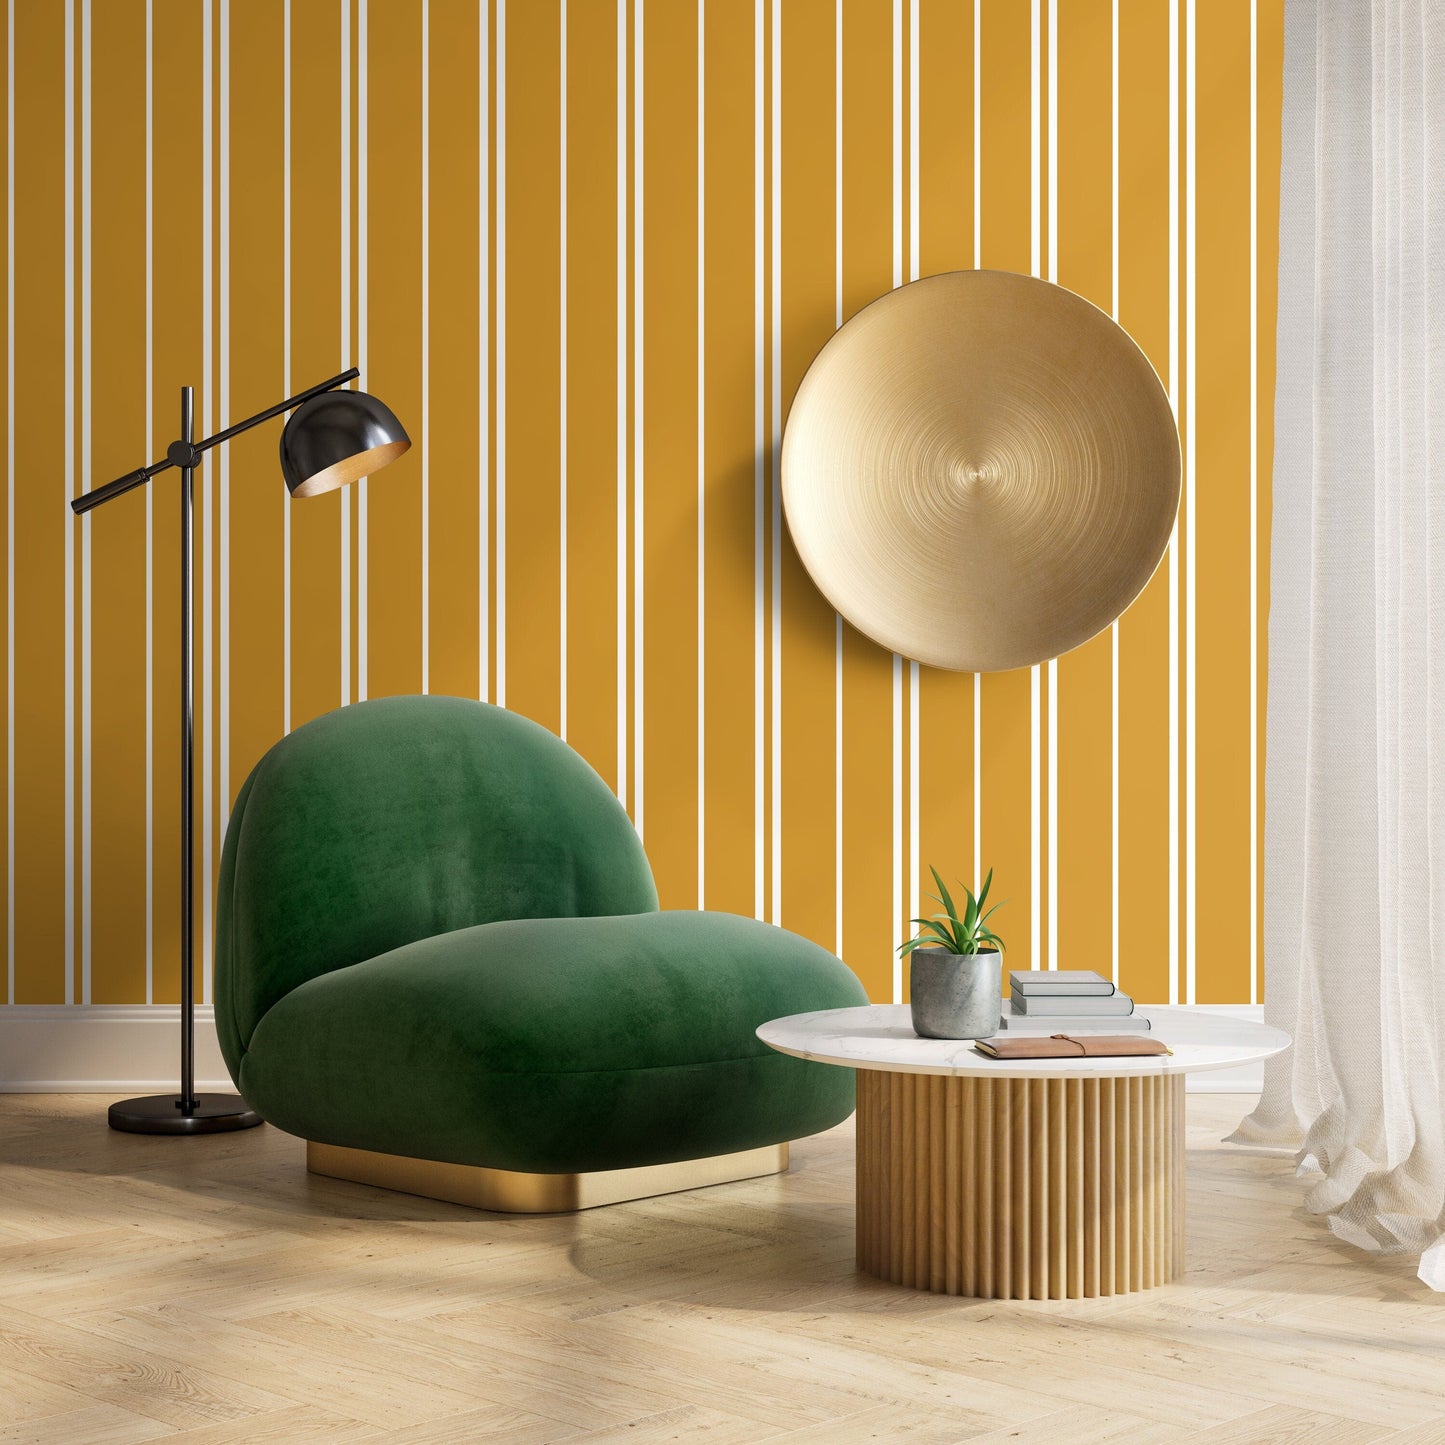 Modern Lines Wallpaper Striped Wallpaper Peel and Stick and Traditional Wallpaper - D768